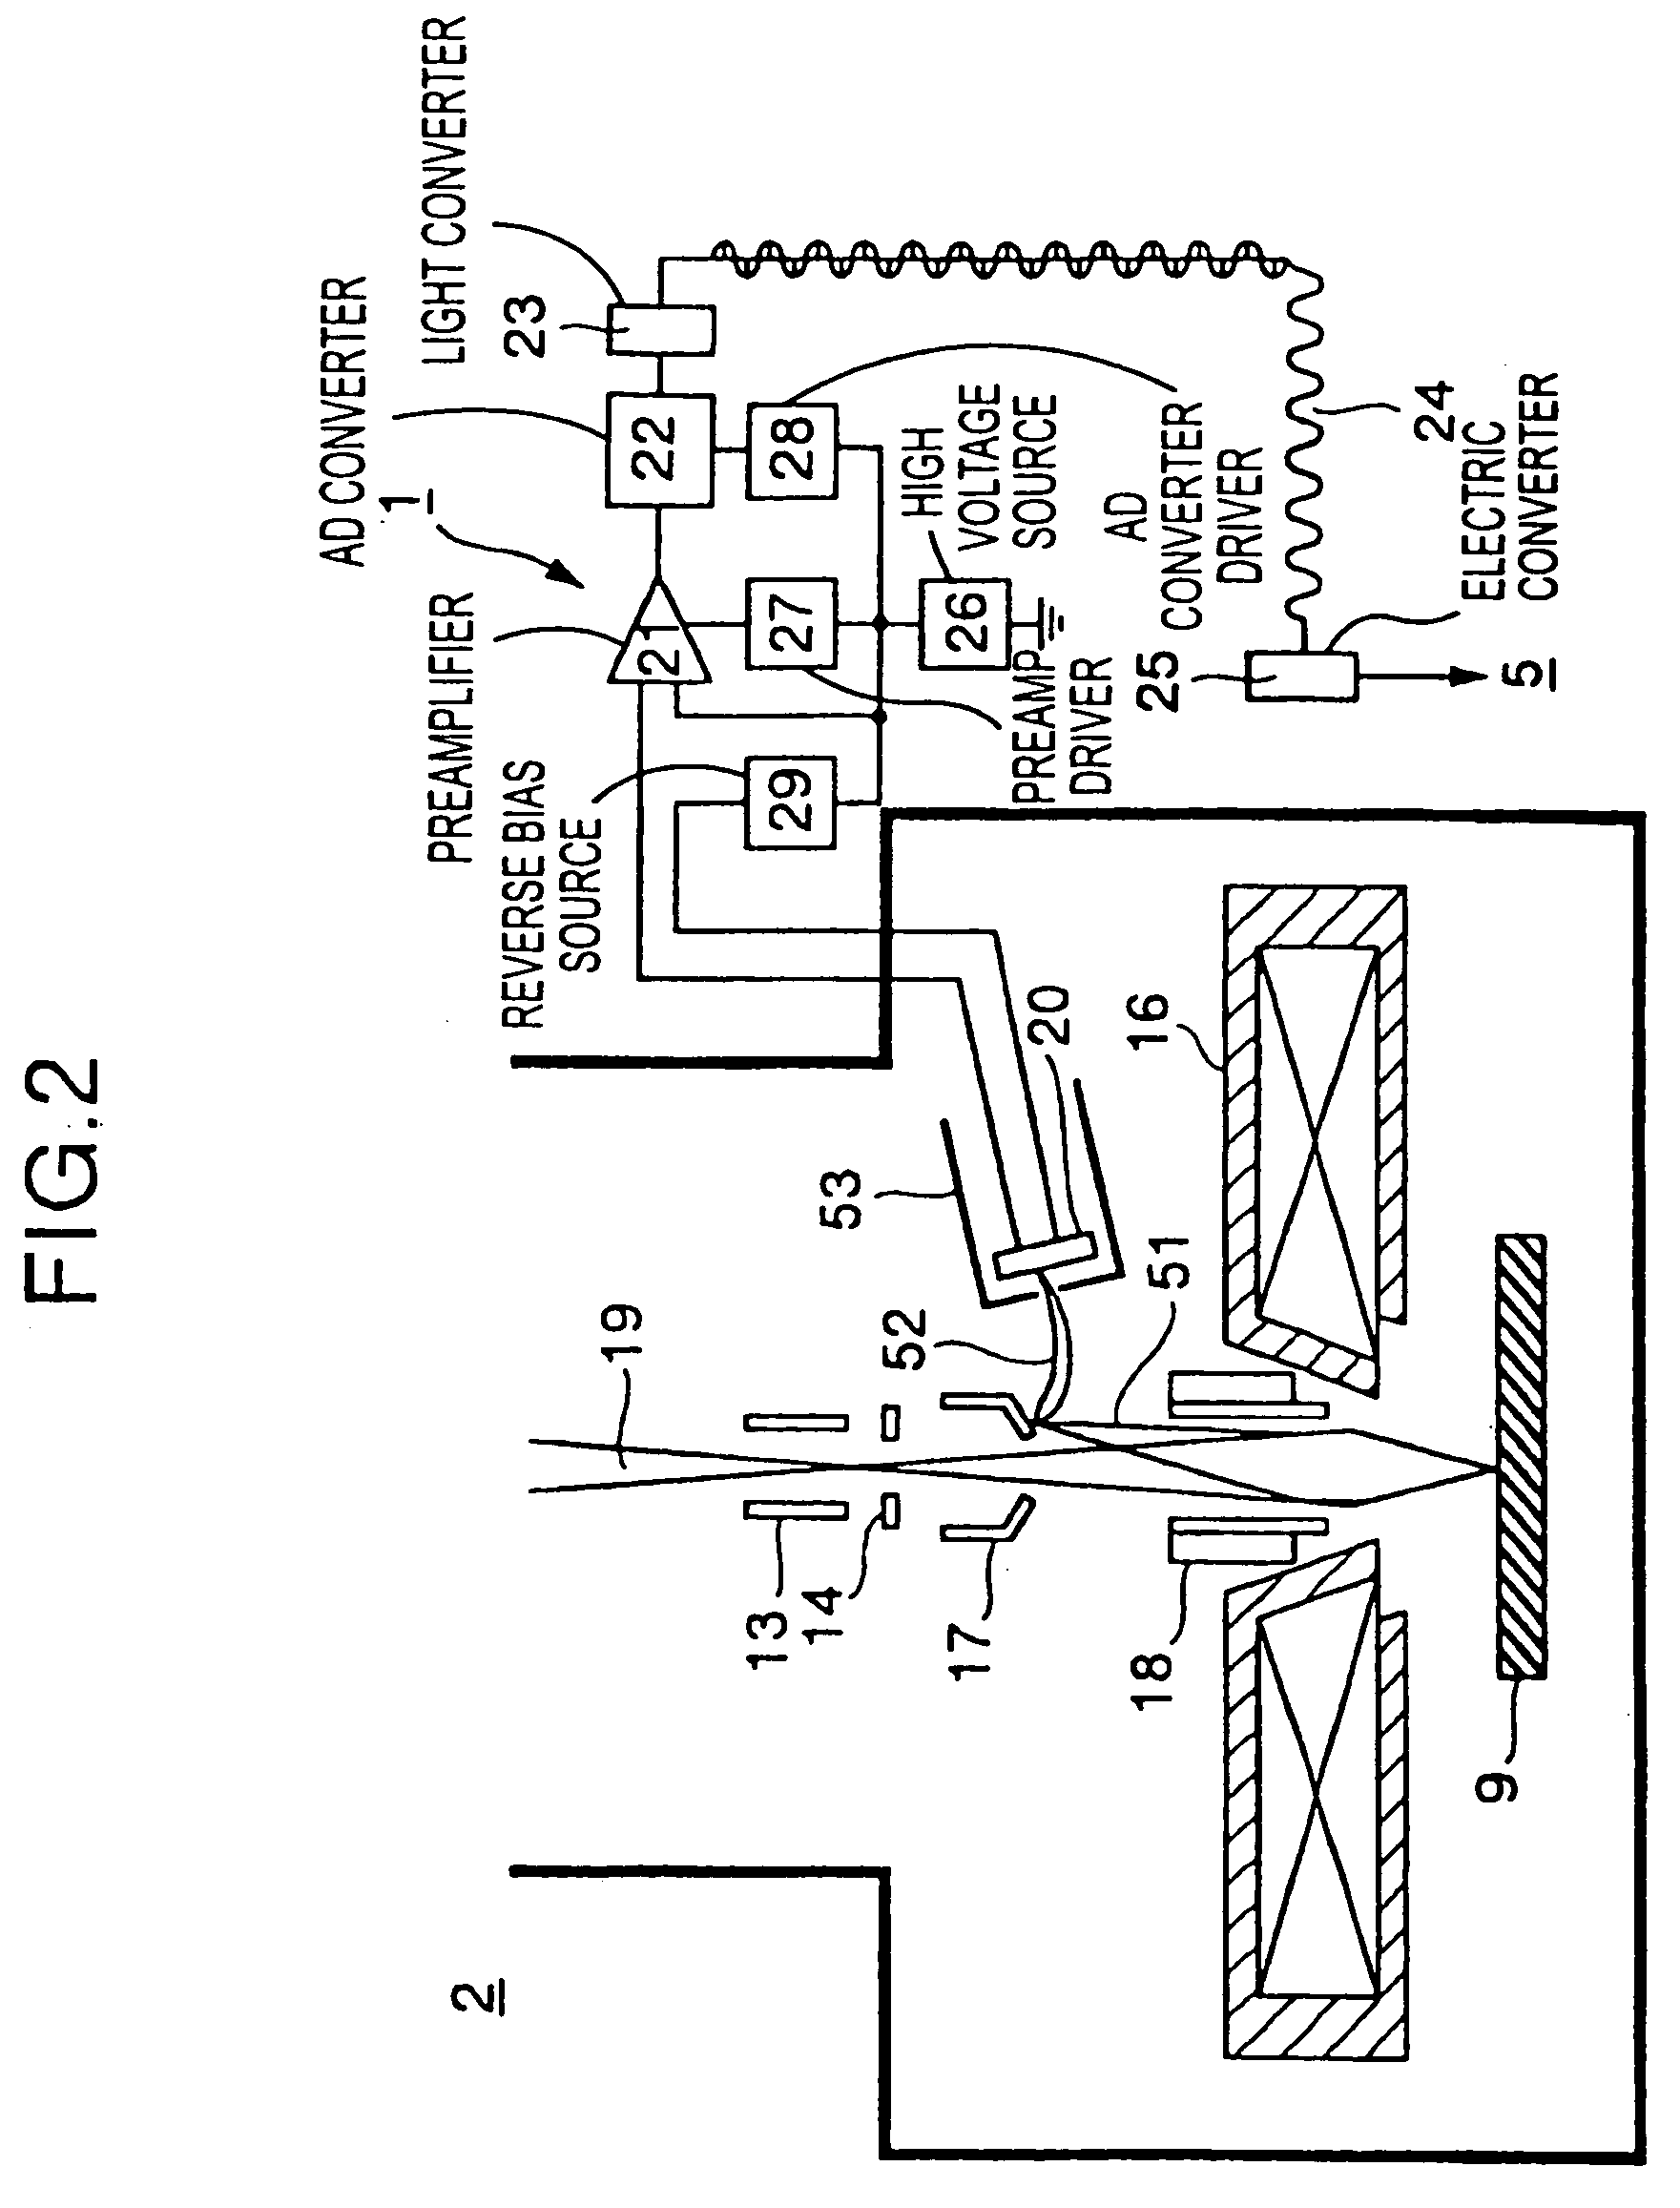 Method and apparatus for inspecting integrated circuit pattern